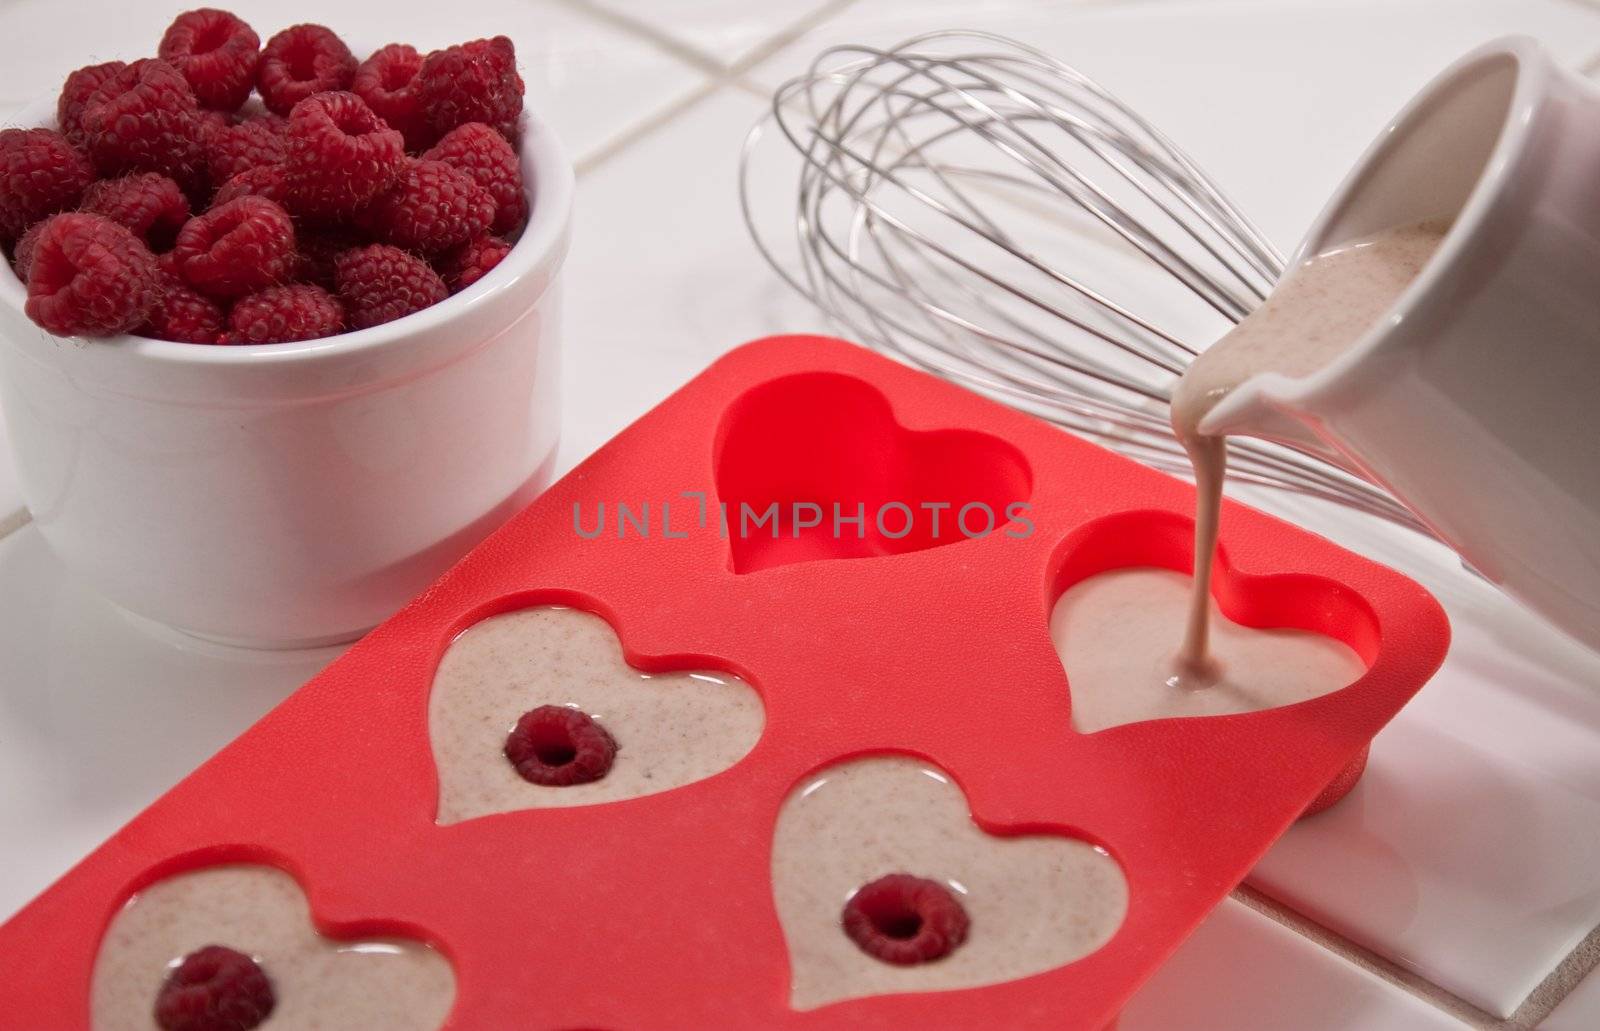 Whisk, bowl of raspberries and heart shaped muffin pan with pouring batter pitcher